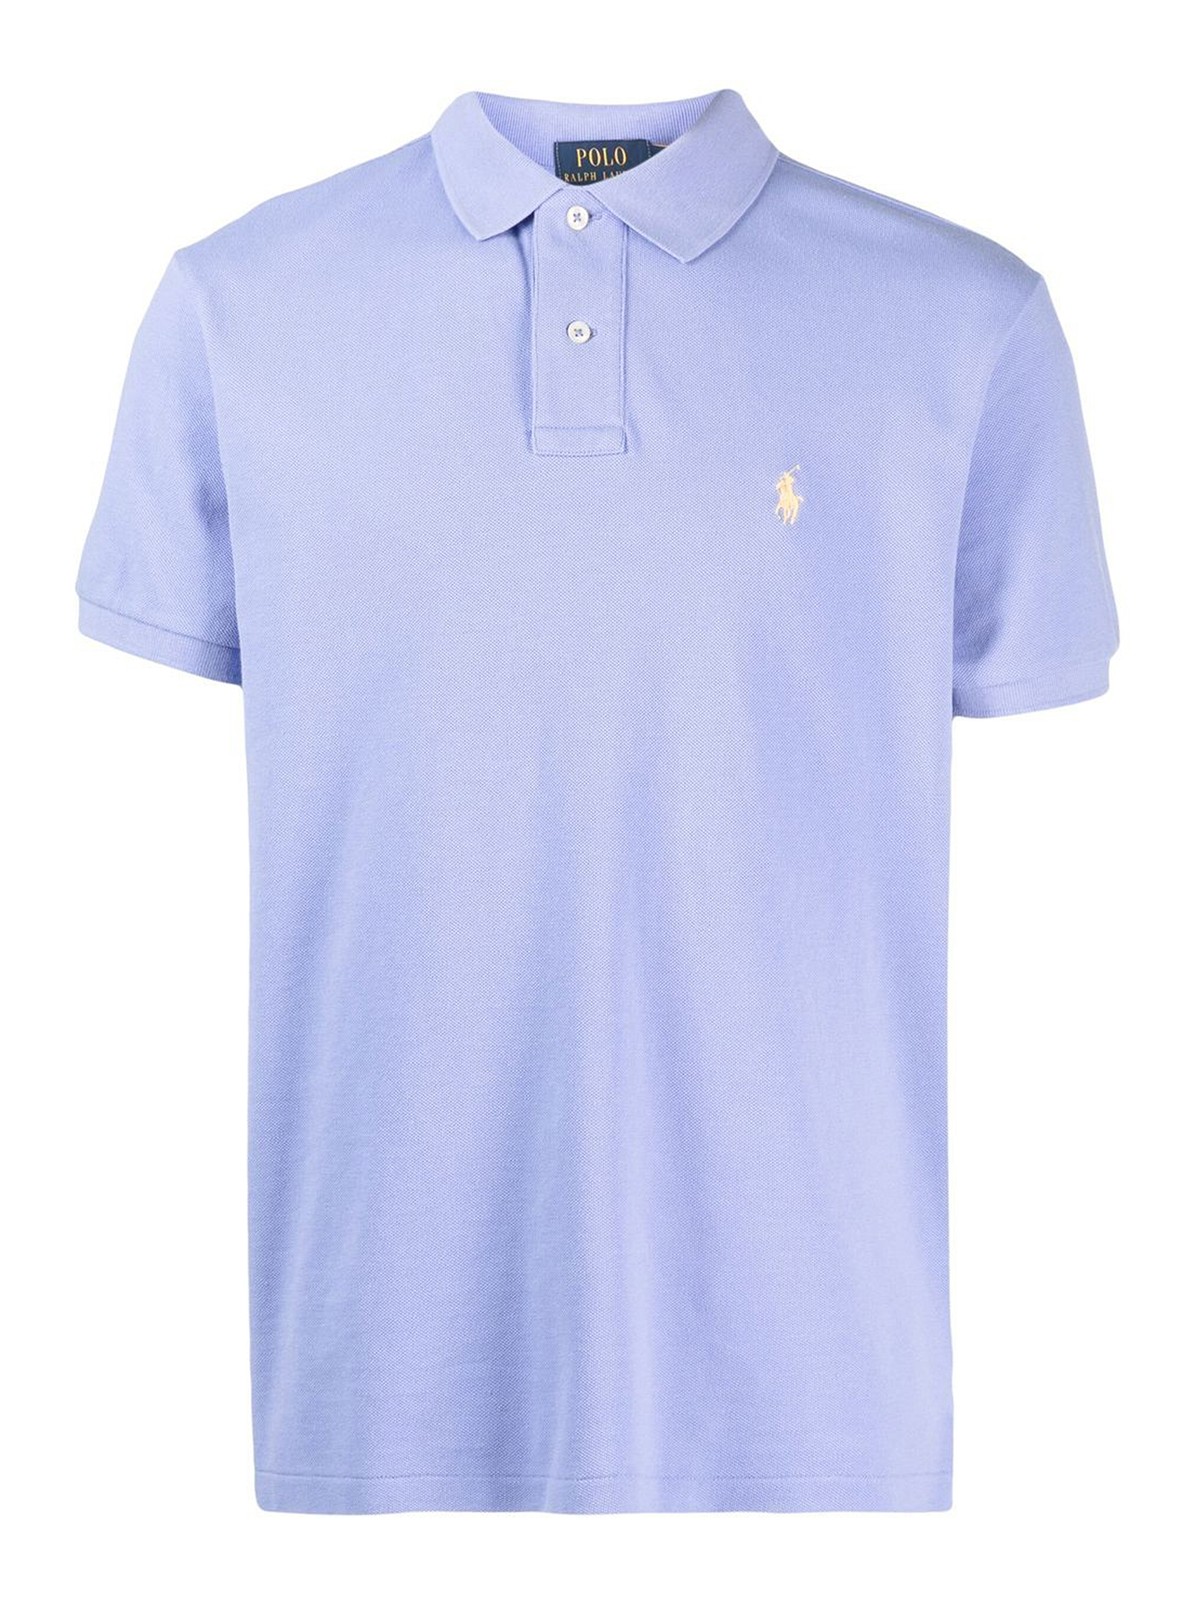 Polo Ralph Lauren Embroidered Logo Polo Shirt In Light Blue